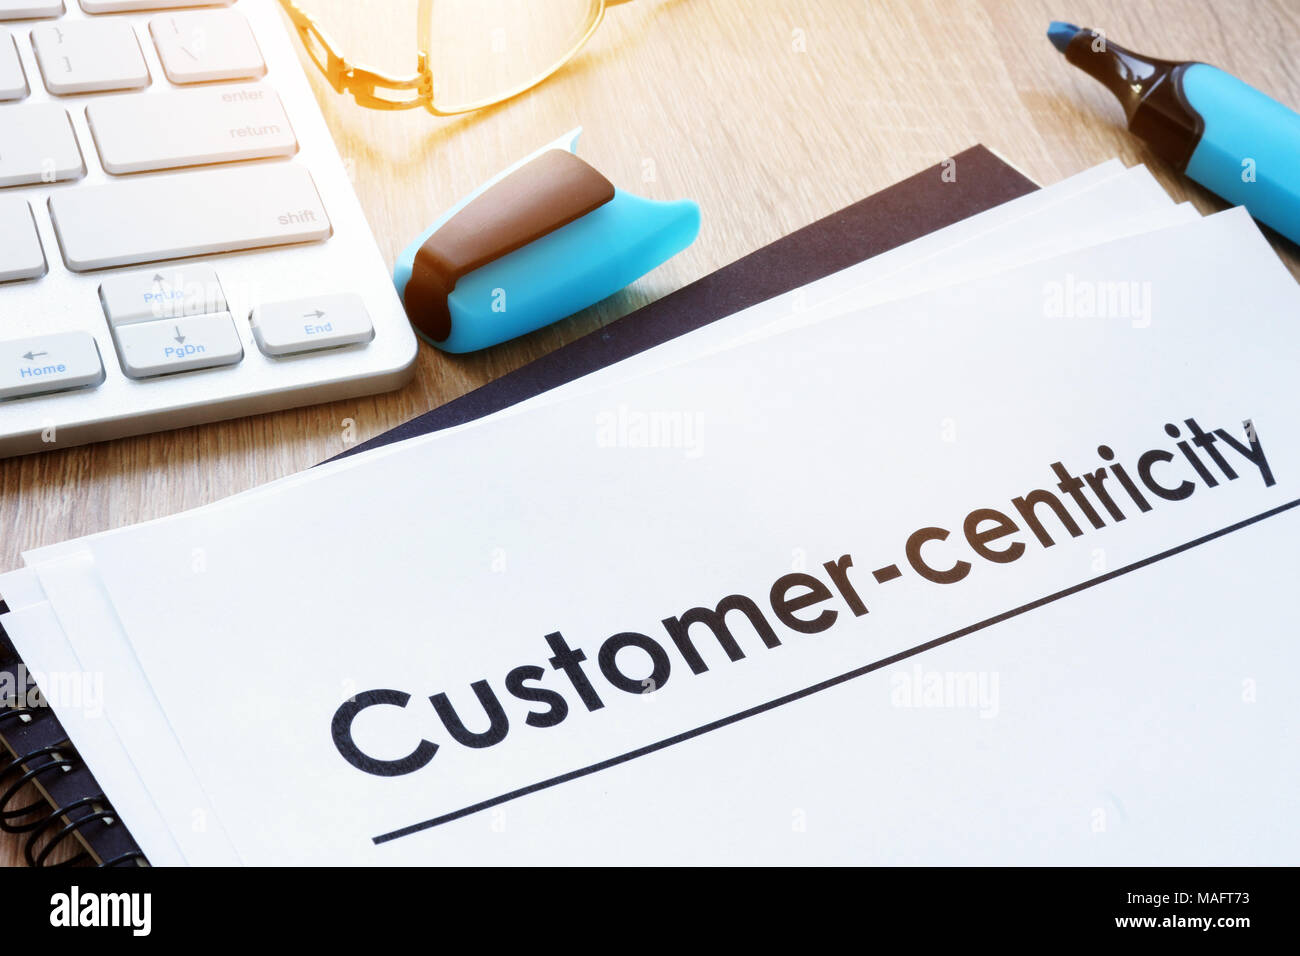 Customer in focus concept. Papers about Customer-centricity. Stock Photo